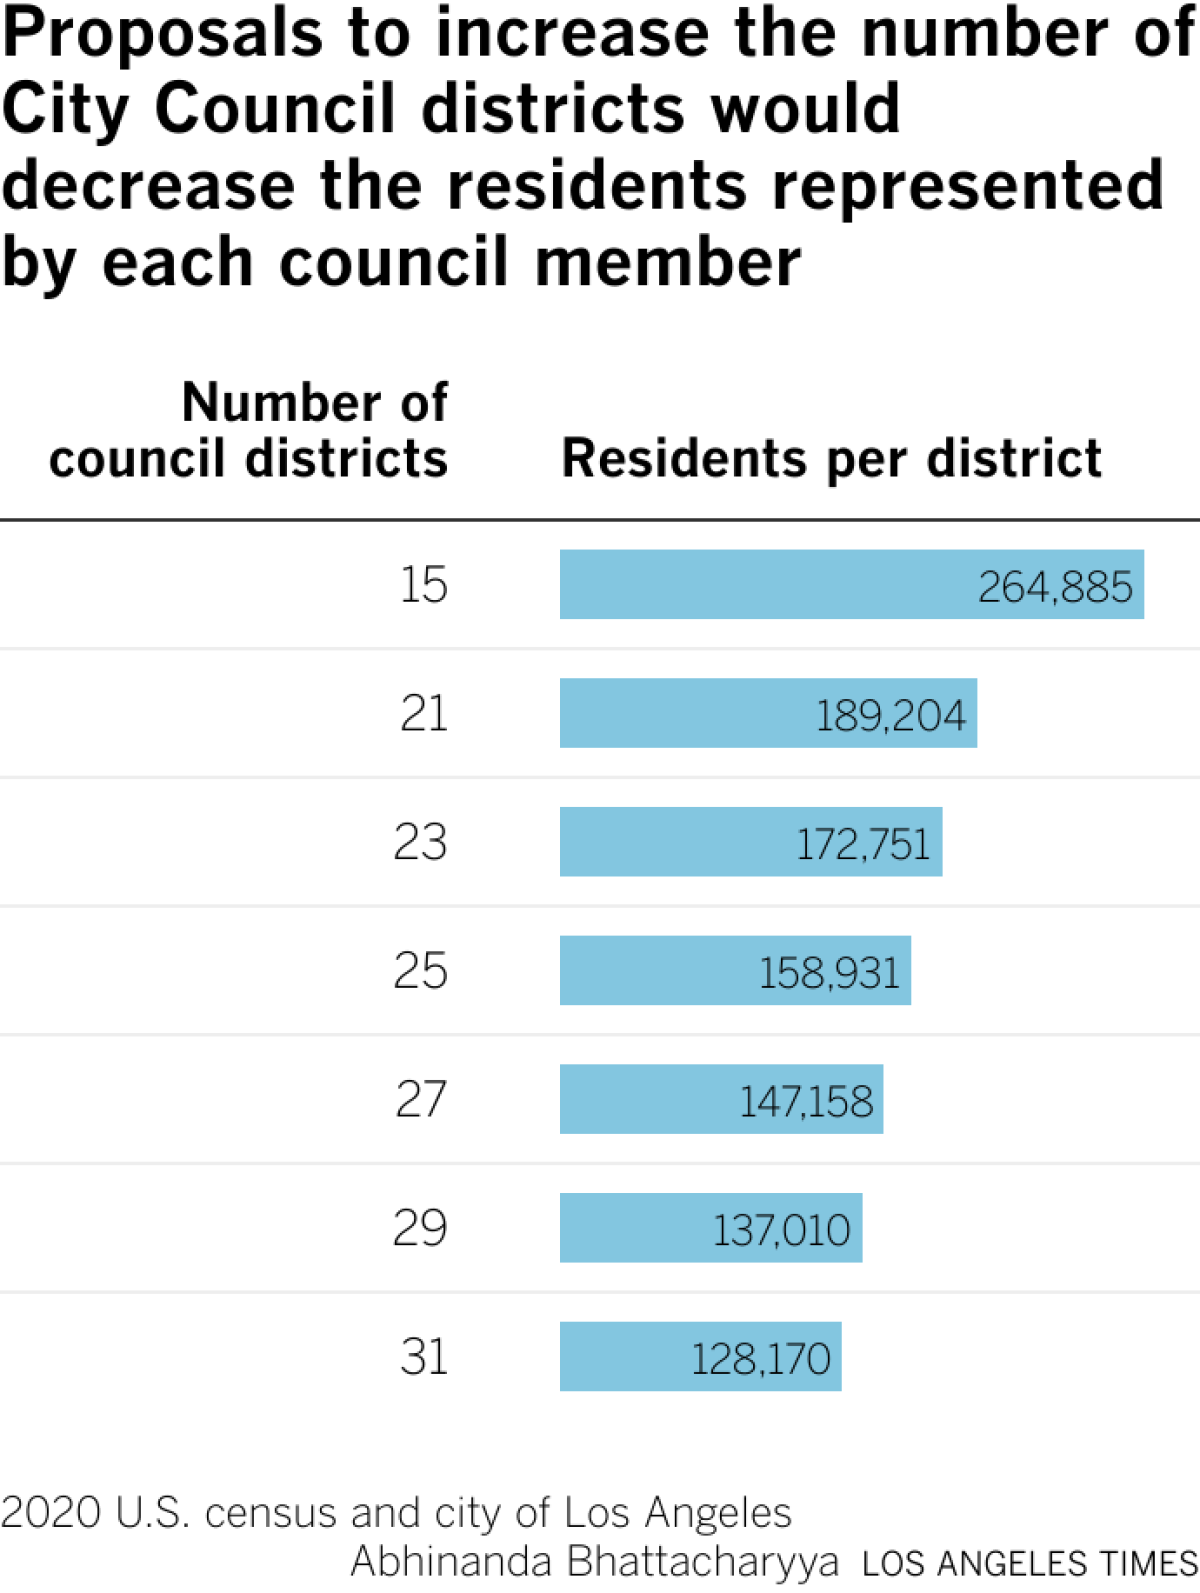 A table showing the number of council districts in one column, and residents per district in the other. As the number of districts increases, the residents per district decrease, which can be seen in bar charts.